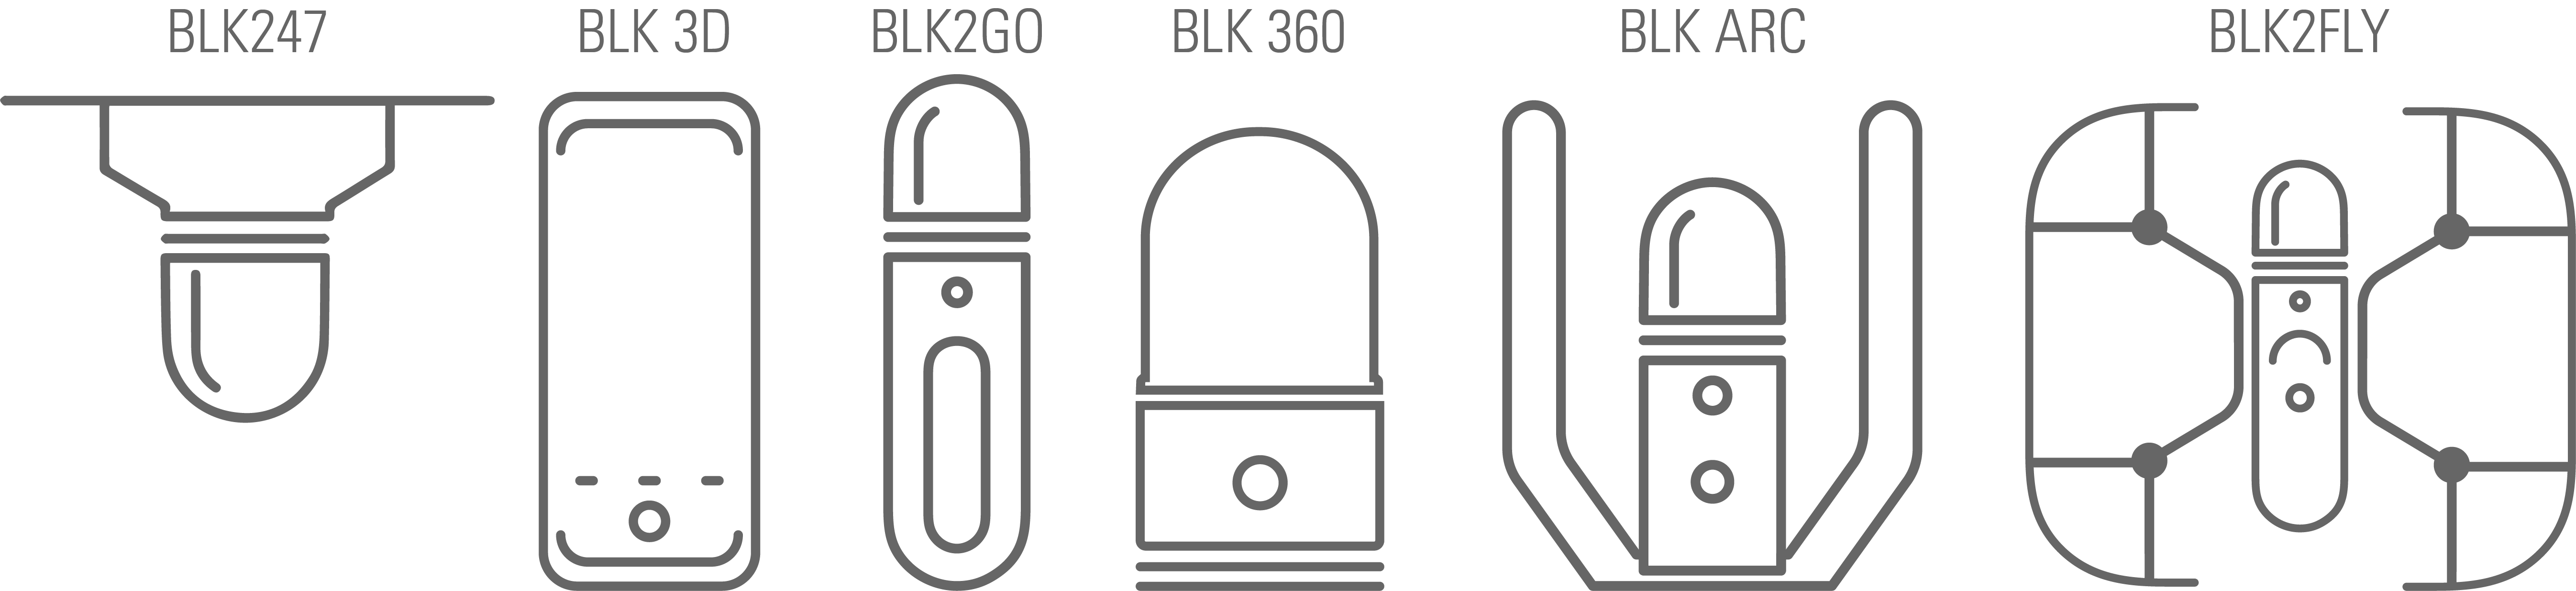 BLK product vectors with labels